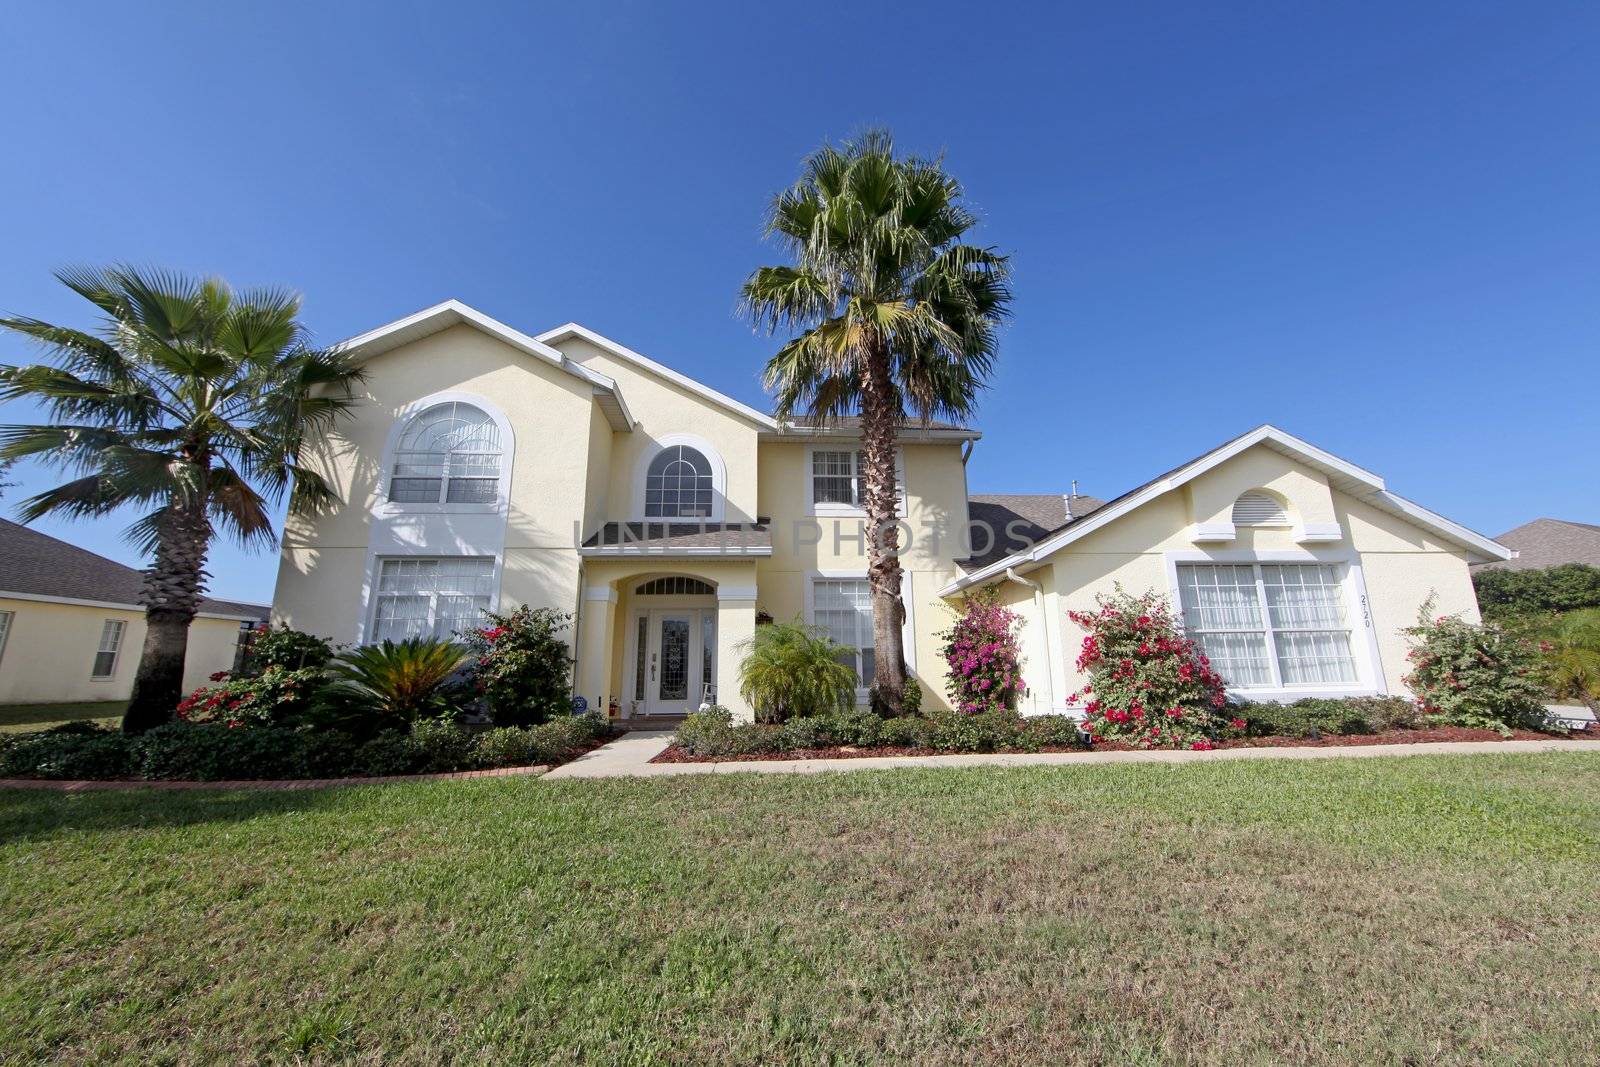 A Front Exterior of a Large Florida Home